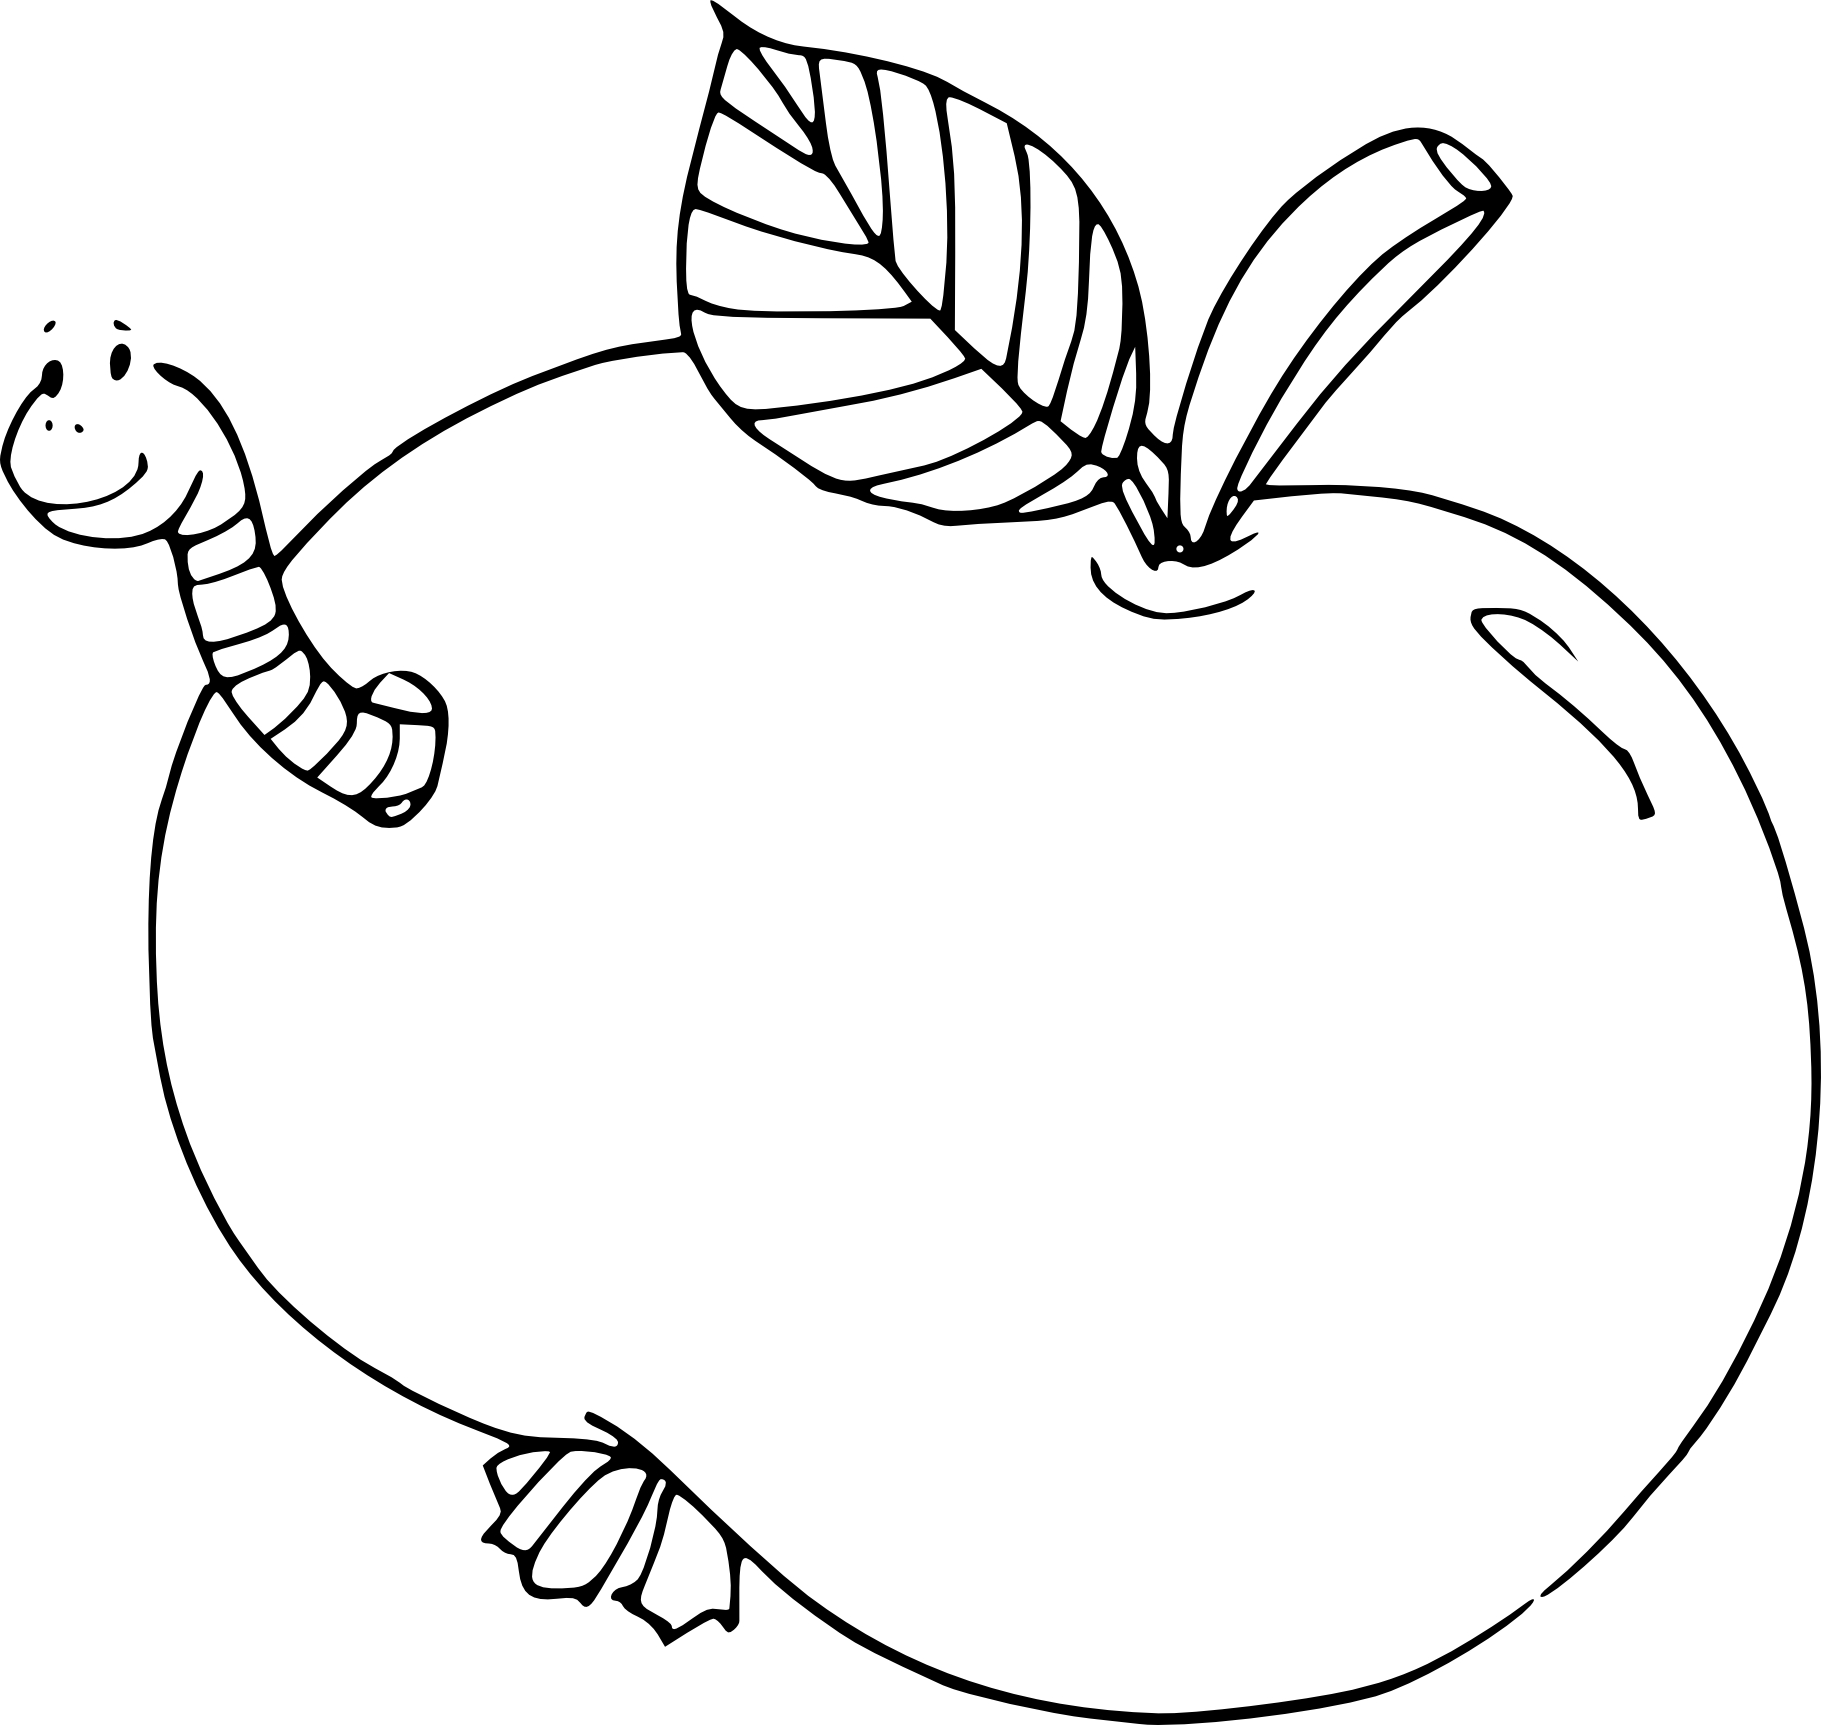 Apple And Worm coloring page